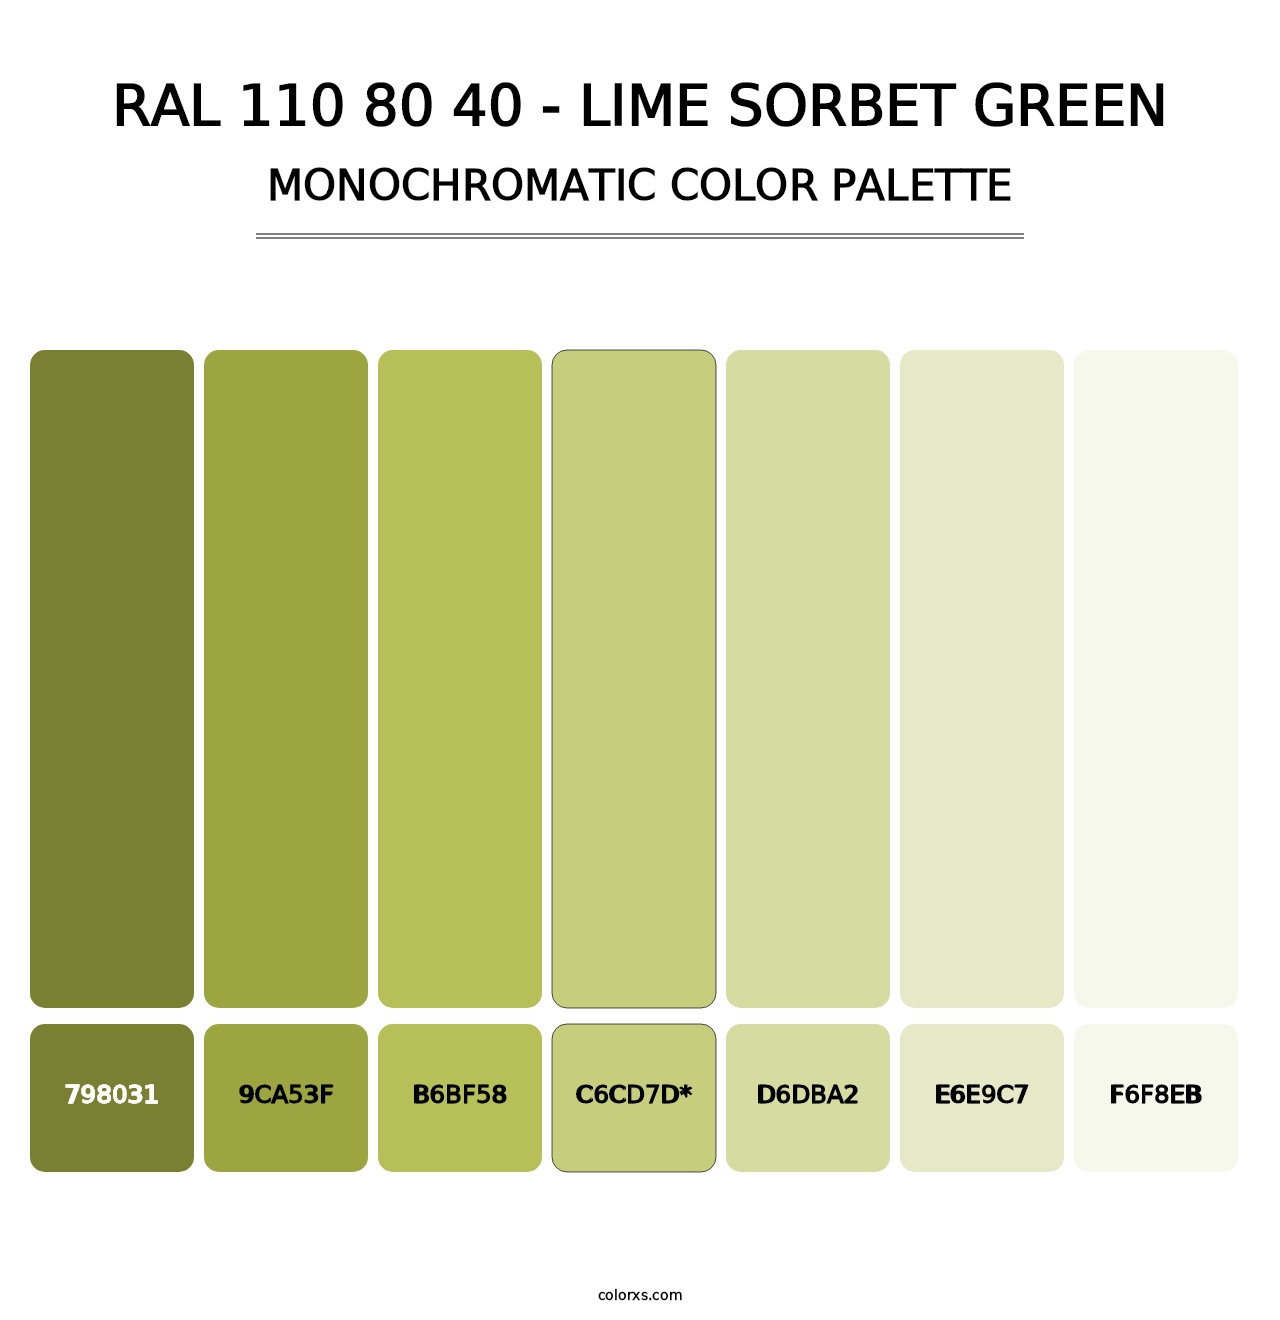 RAL 110 80 40 - Lime Sorbet Green - Monochromatic Color Palette